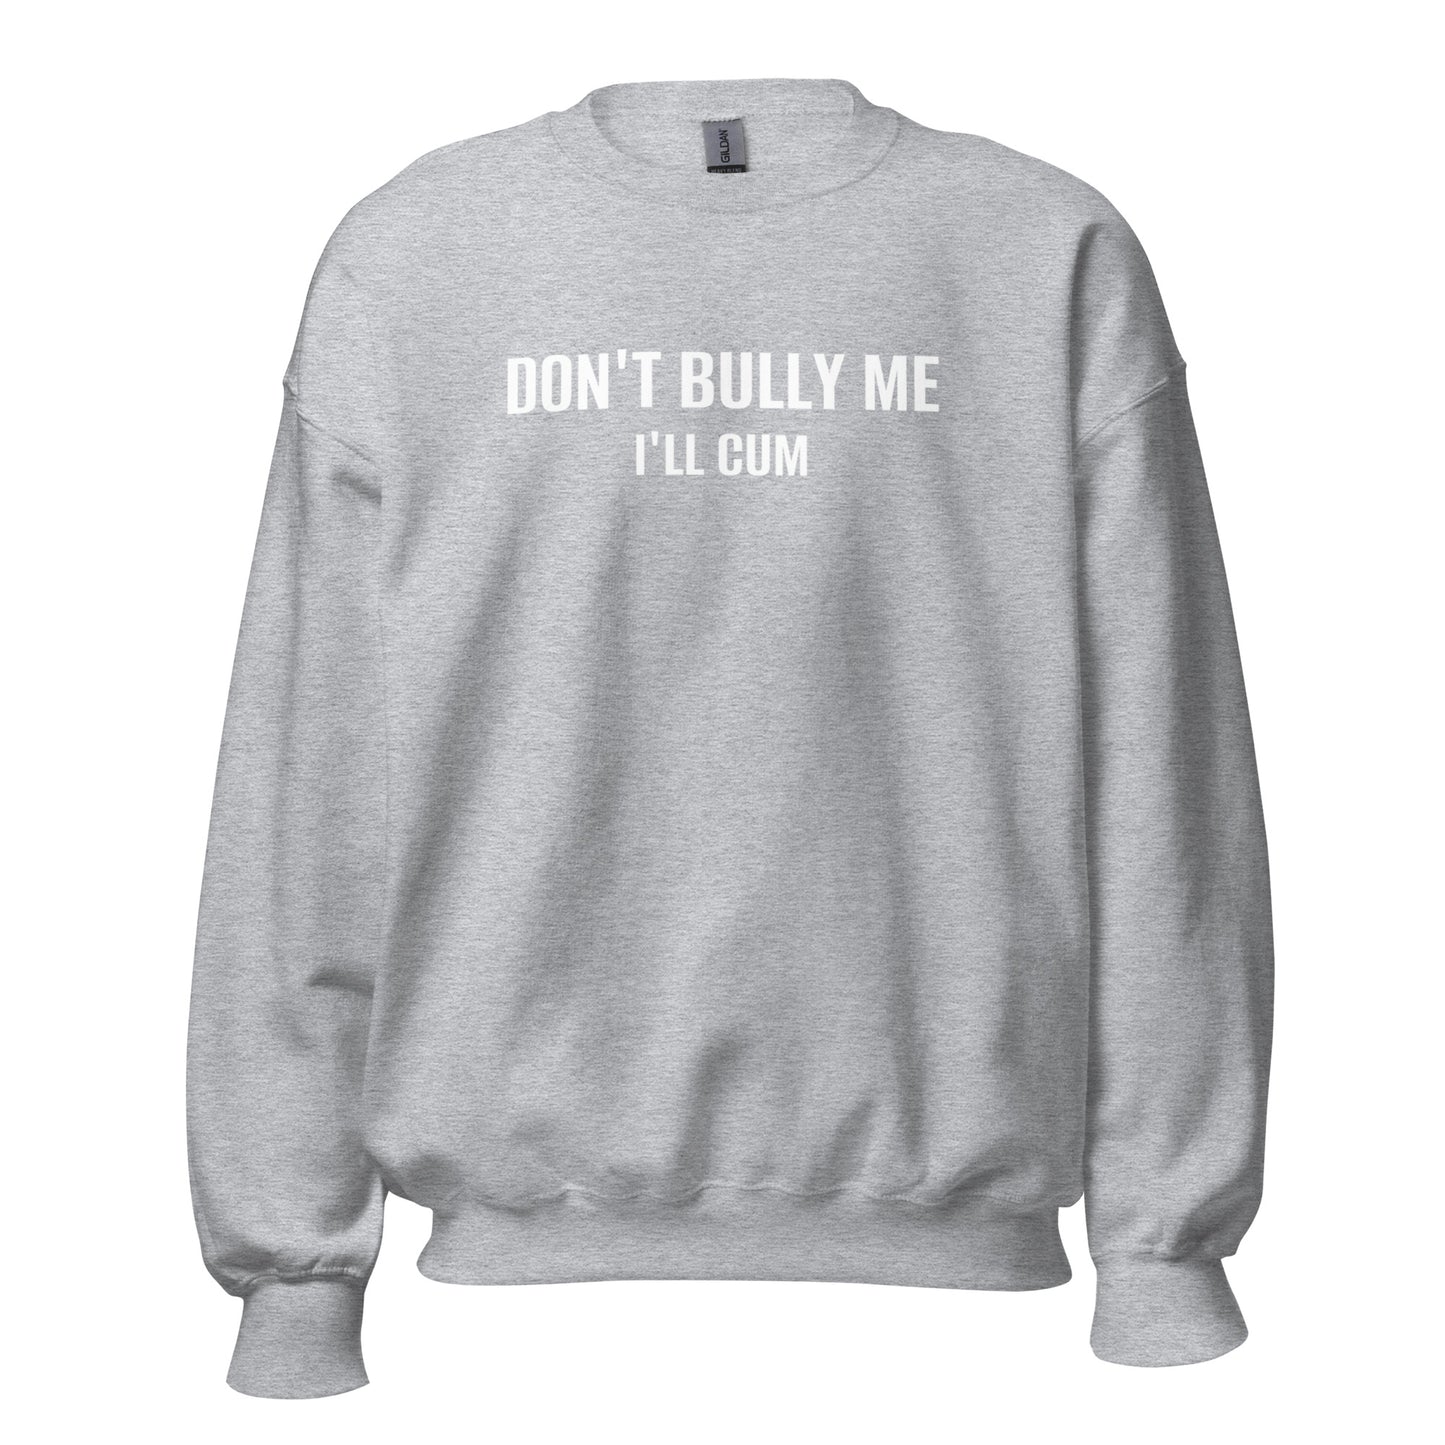 DONT BULLY ME ILL CUM